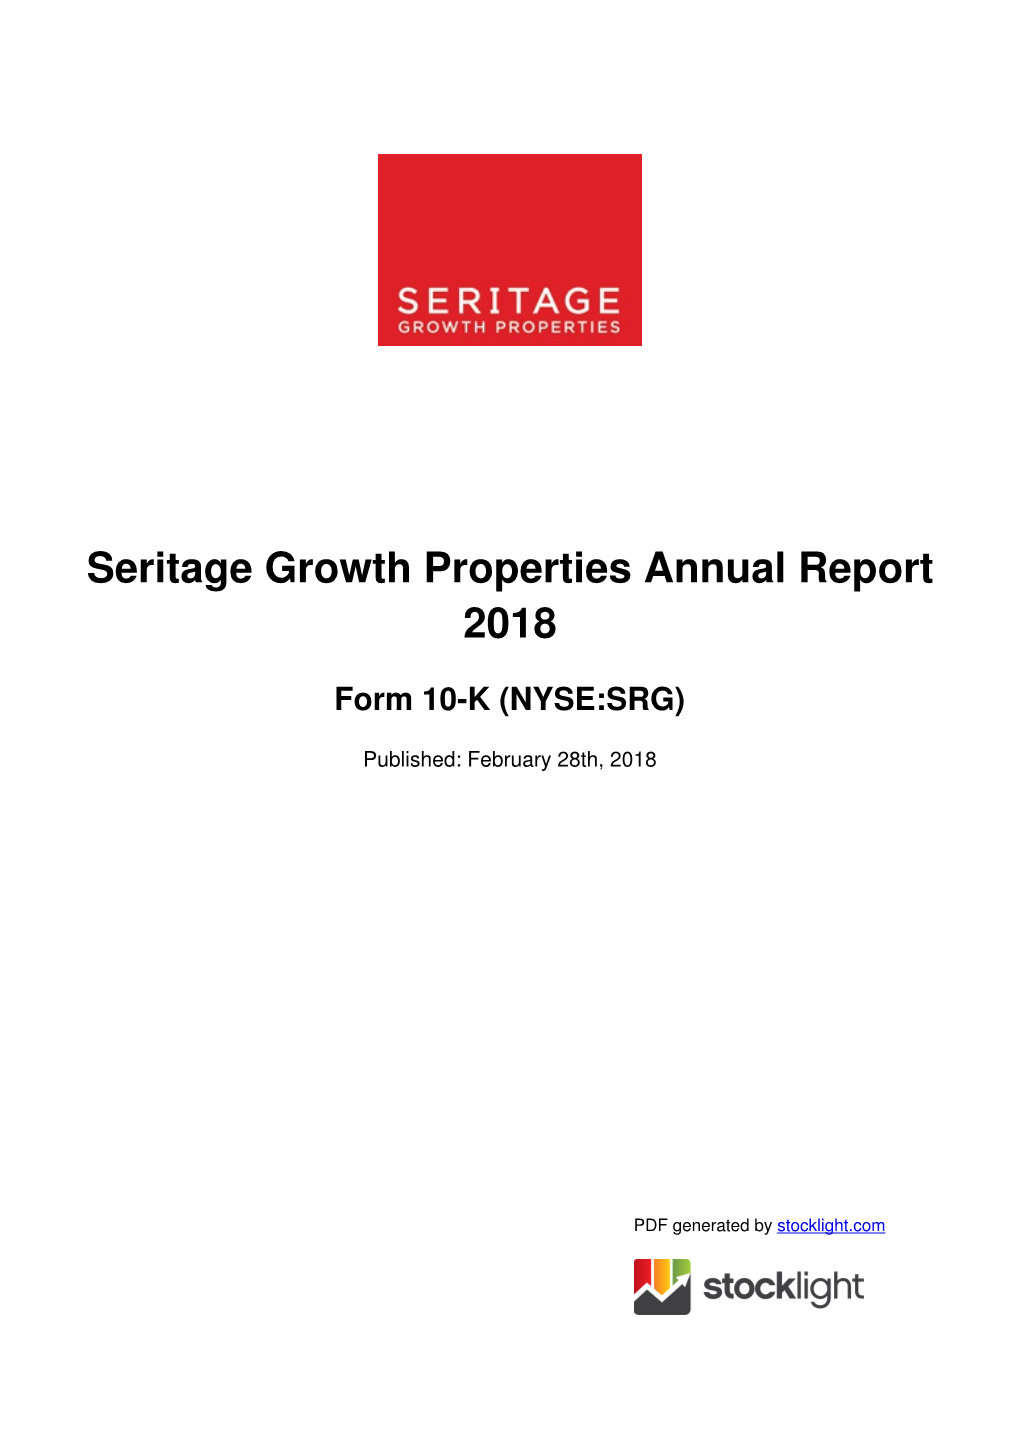 Seritage Growth Properties Annual Report 2018